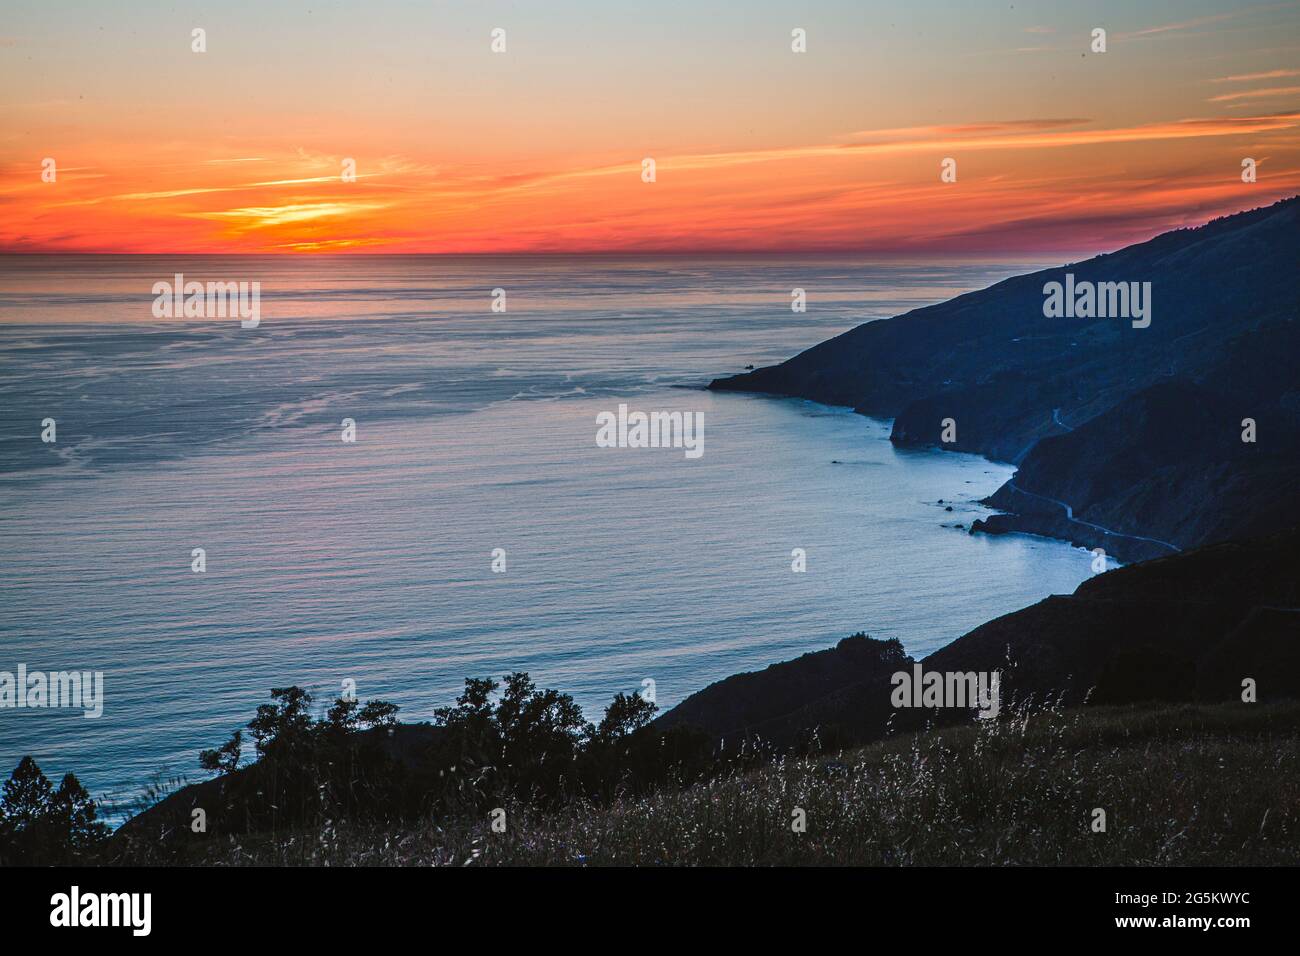 Sunset over Pacific Ocean and Big Sur Coast from mountain peak. Stock Photo